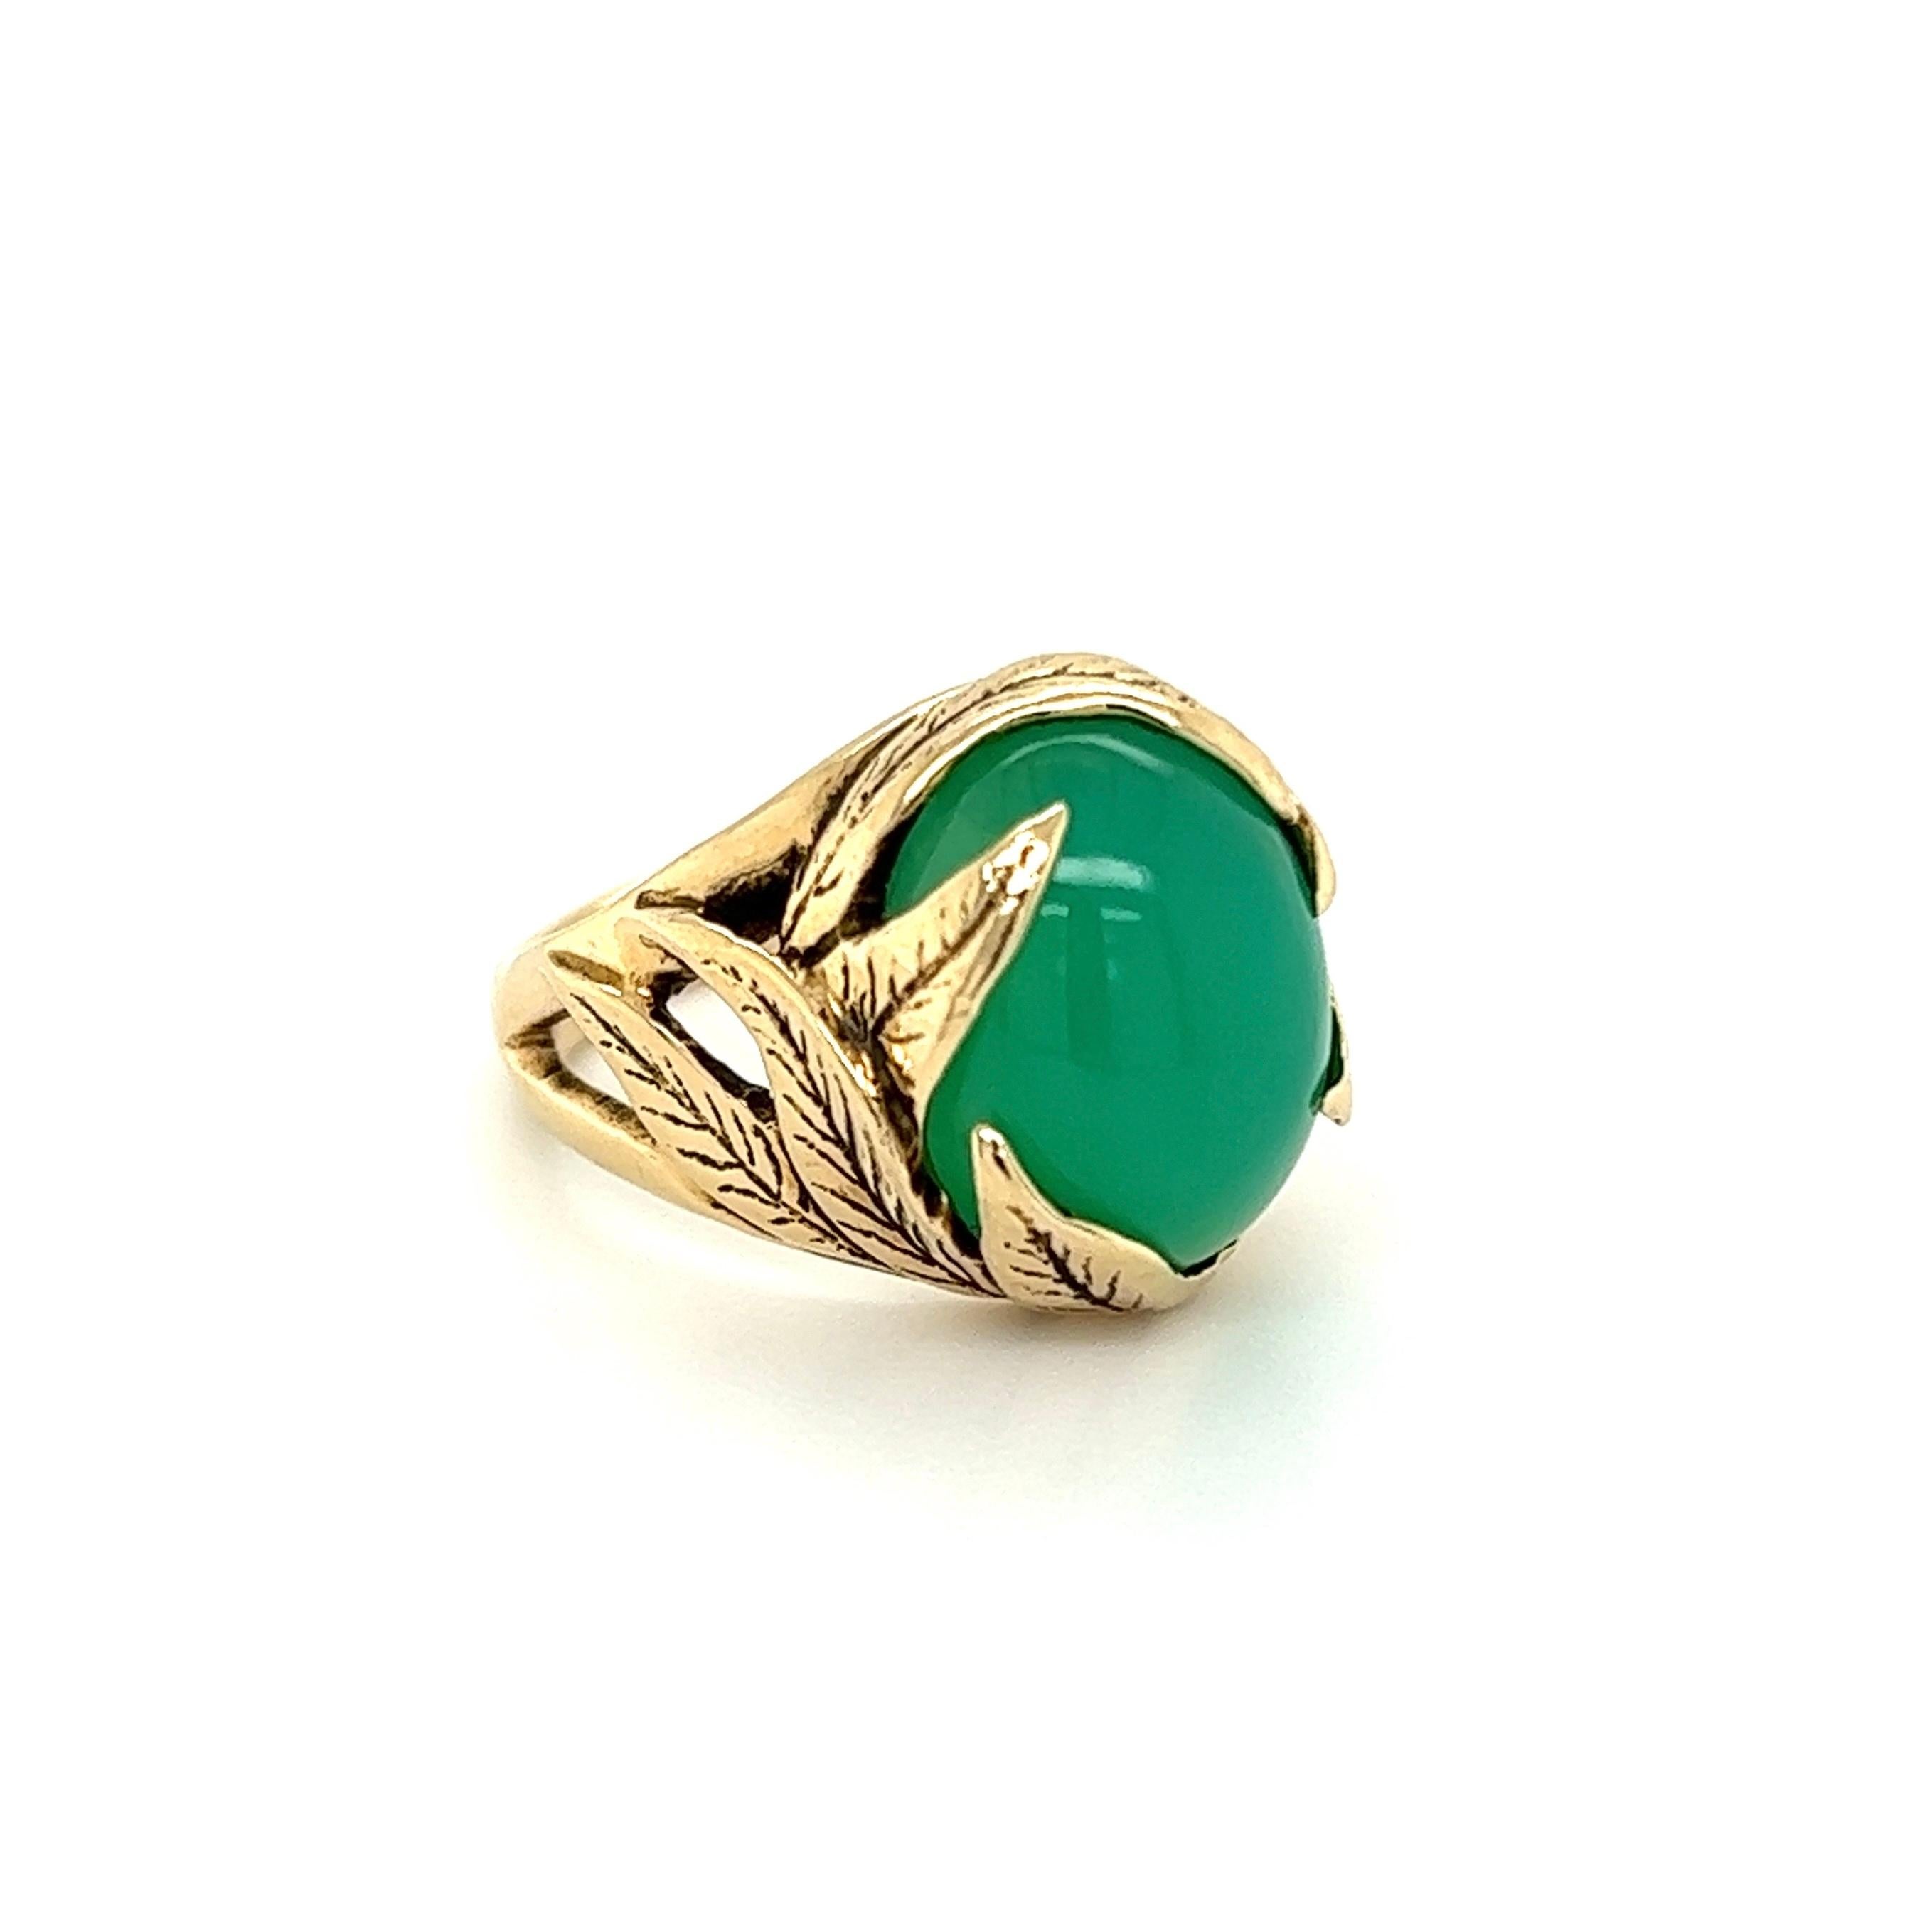 Simply Beautiful! Vintage Mid Century Modern Chrysoprase Gold Solitaire Cocktail Ring. Centering a Hand set securely nestled Chrysoprase. Hand crafted 14K Yellow Gold foliate mounting. Approx. Dimensions of the ring: 1.00